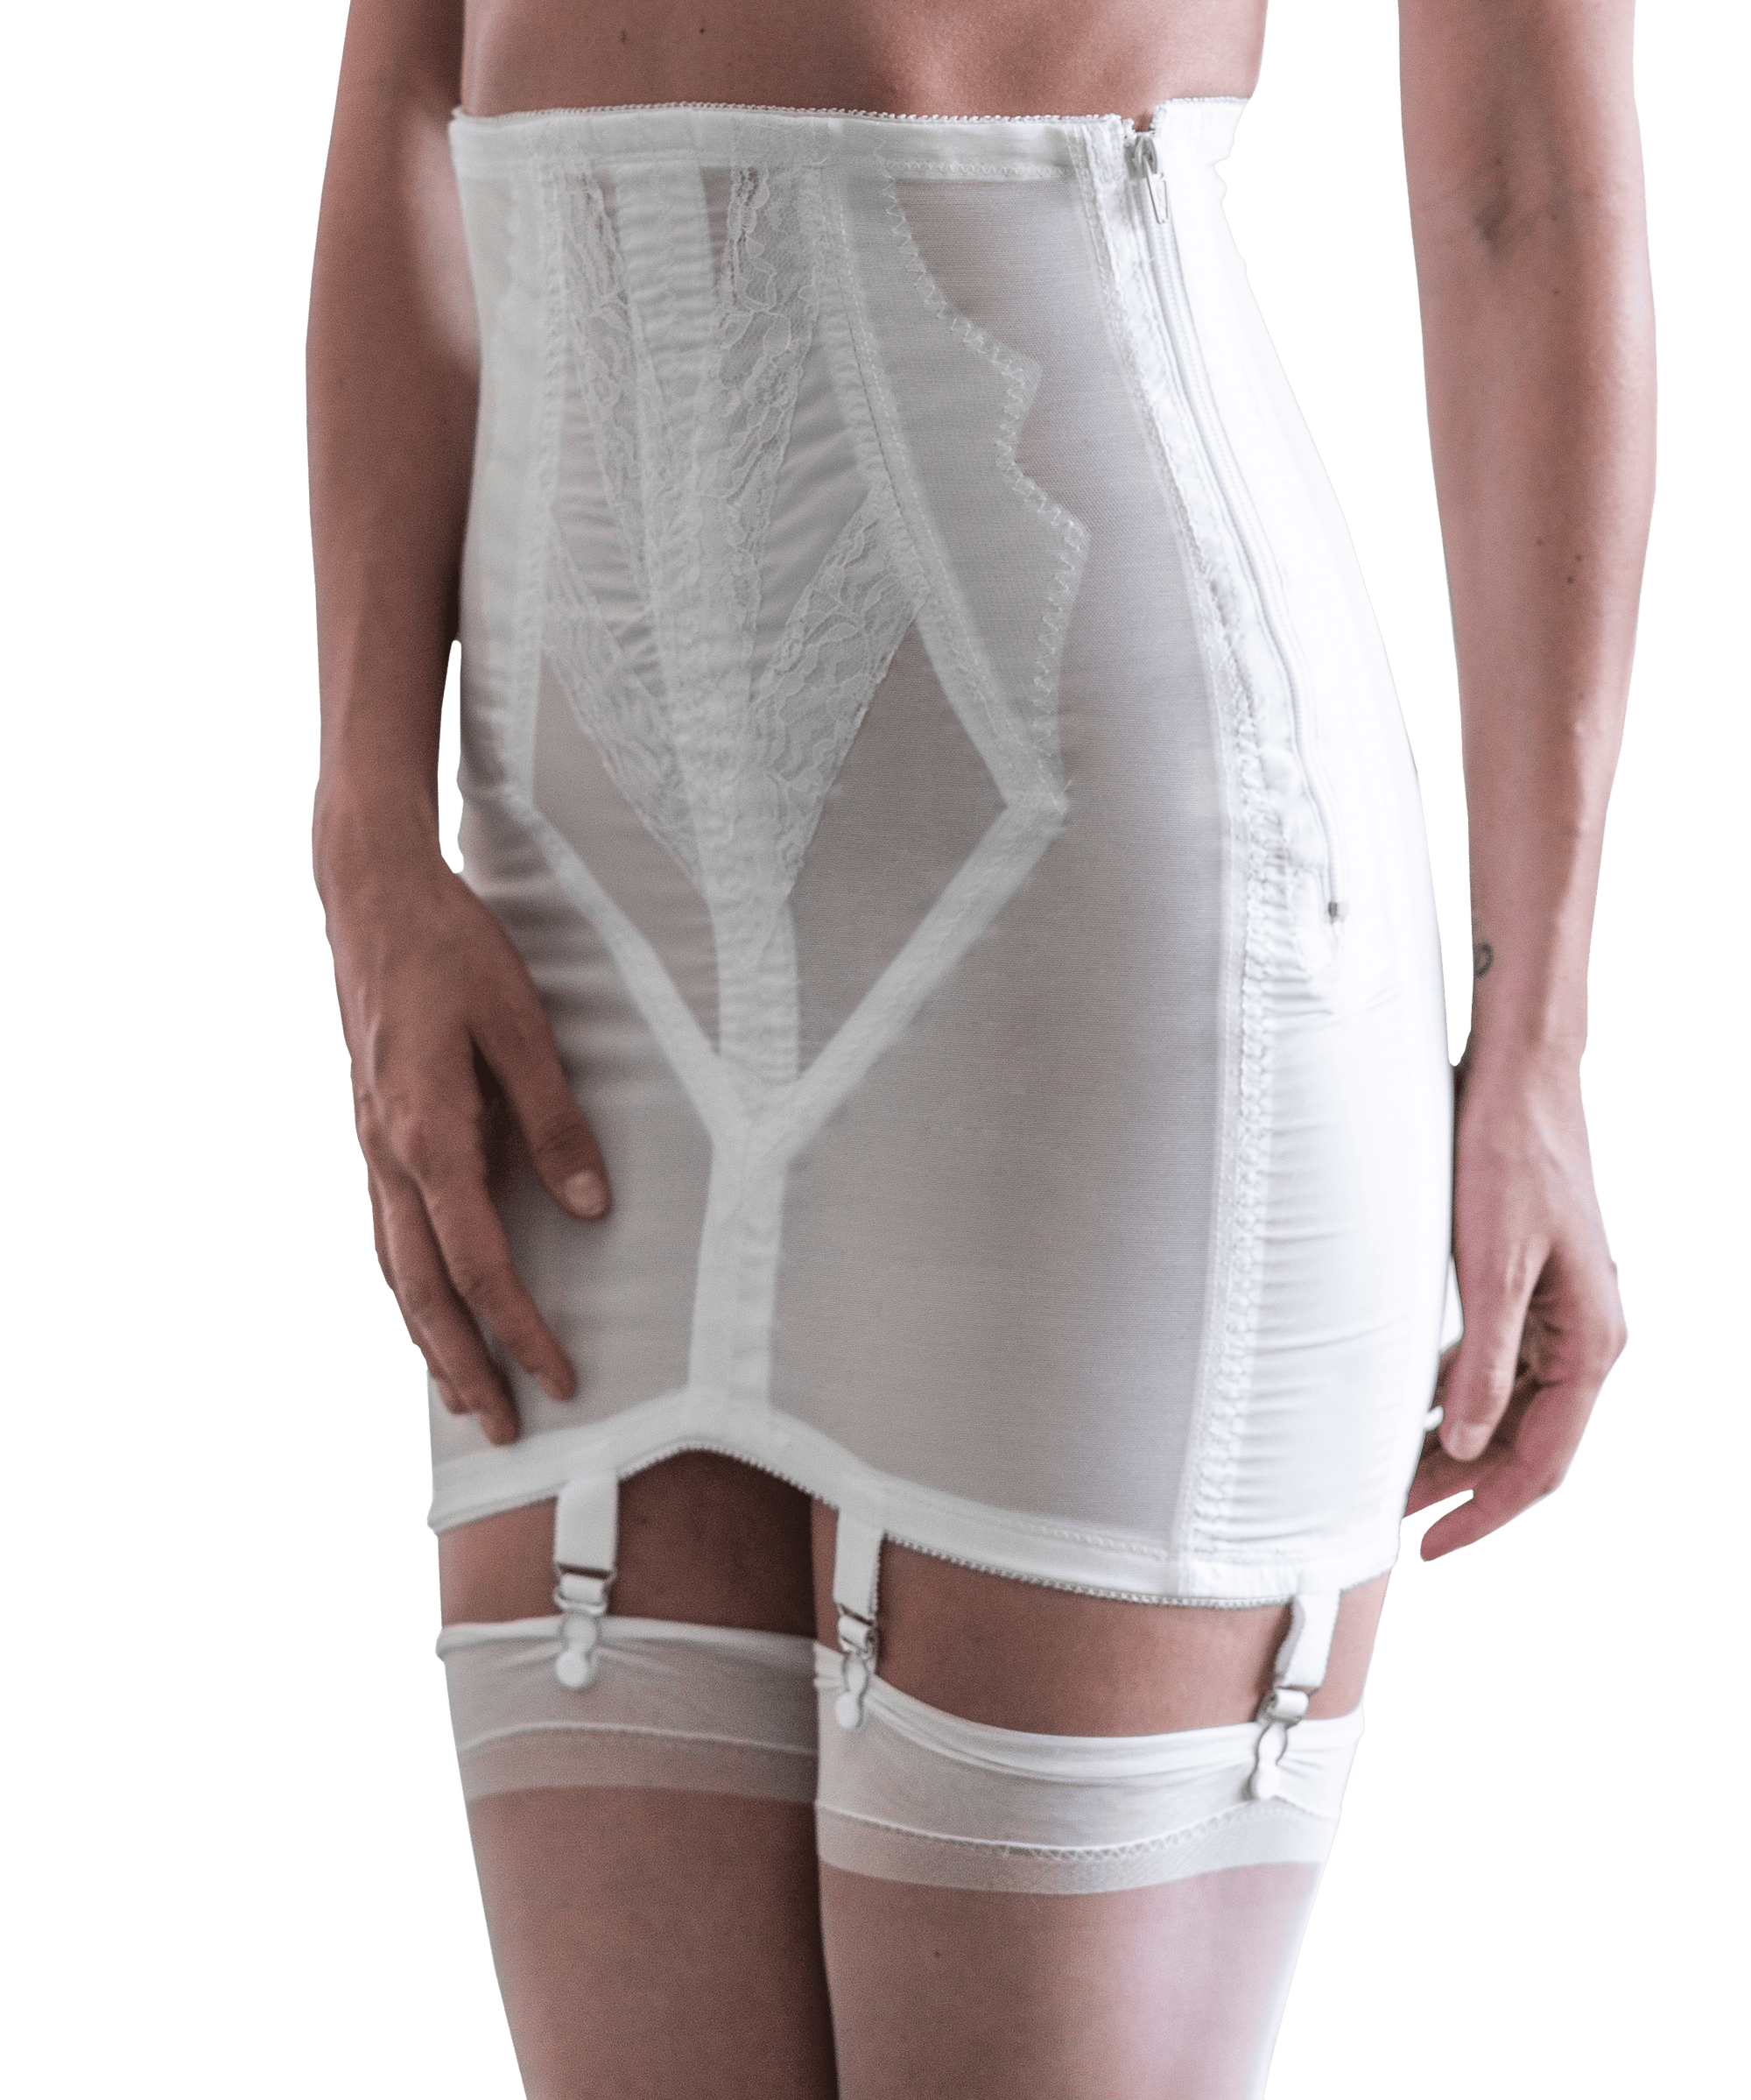 RAGO Style 1294 - Open Bottom Girdle Extra Firm Shaping